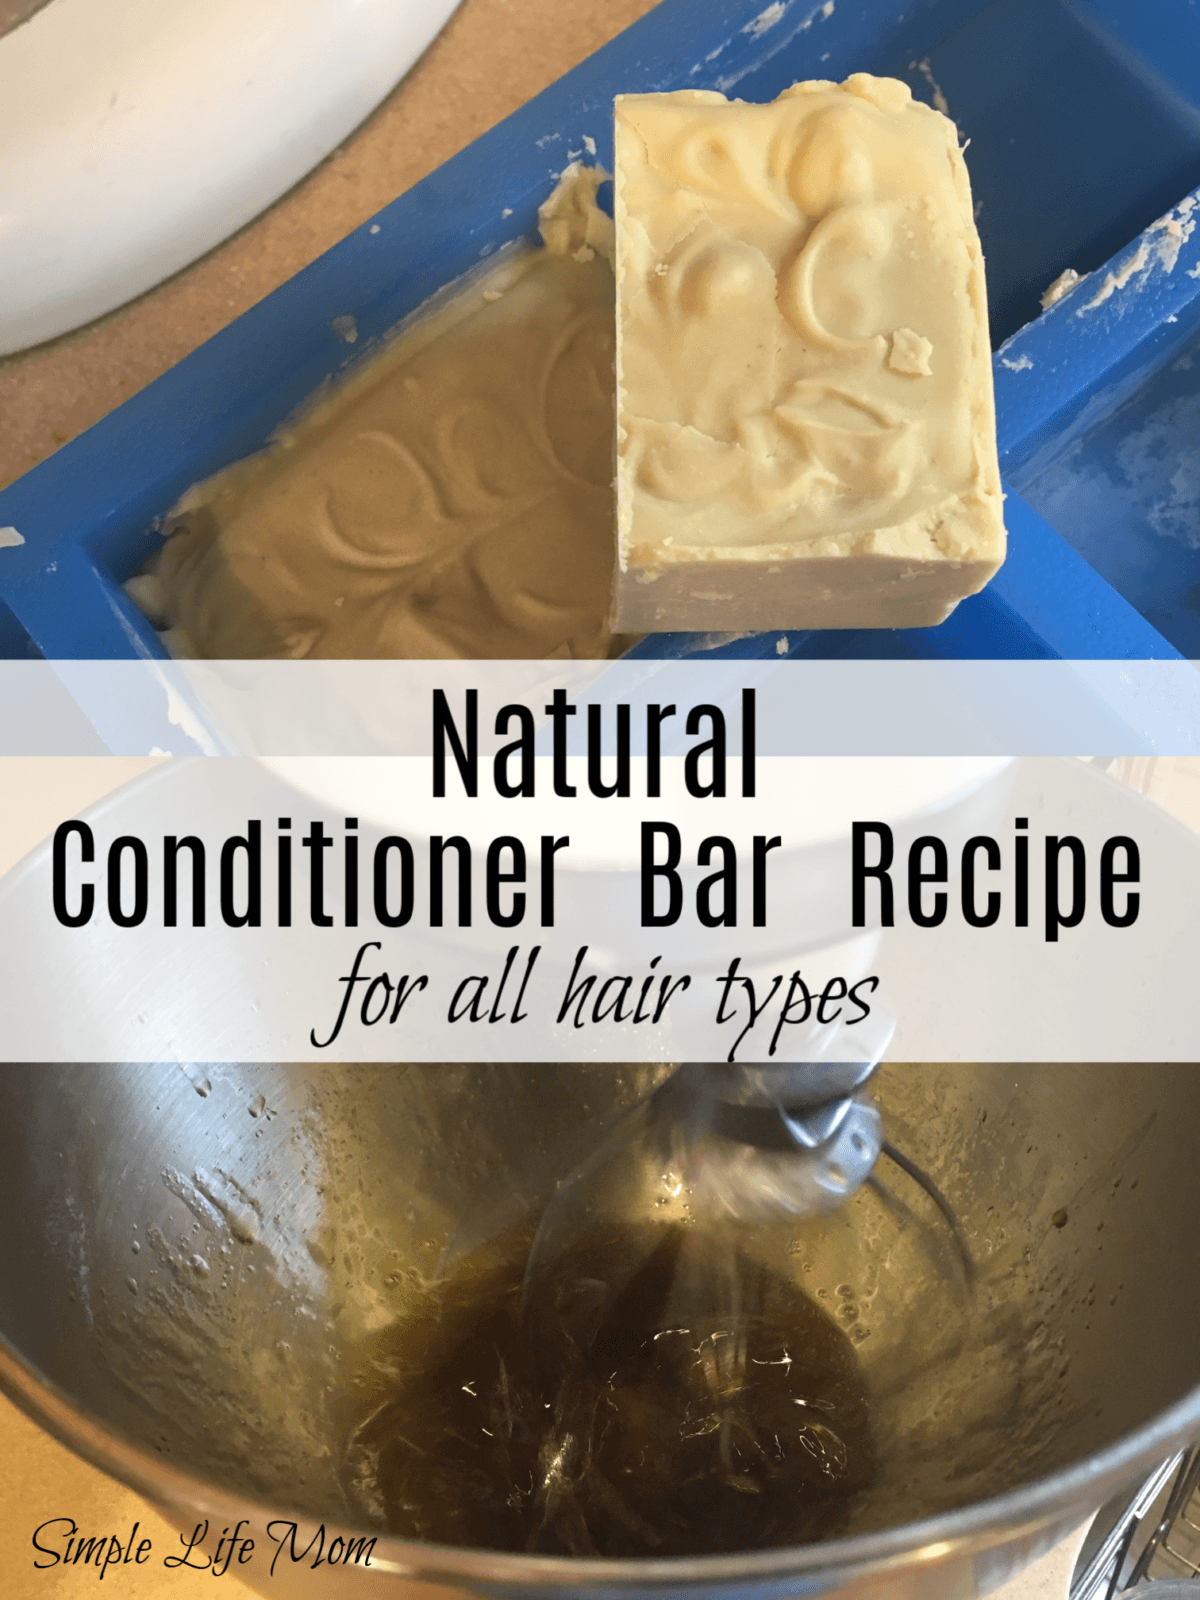 Easy Conditioner Bar Recipe for All Hair Types - Simple Life Mom